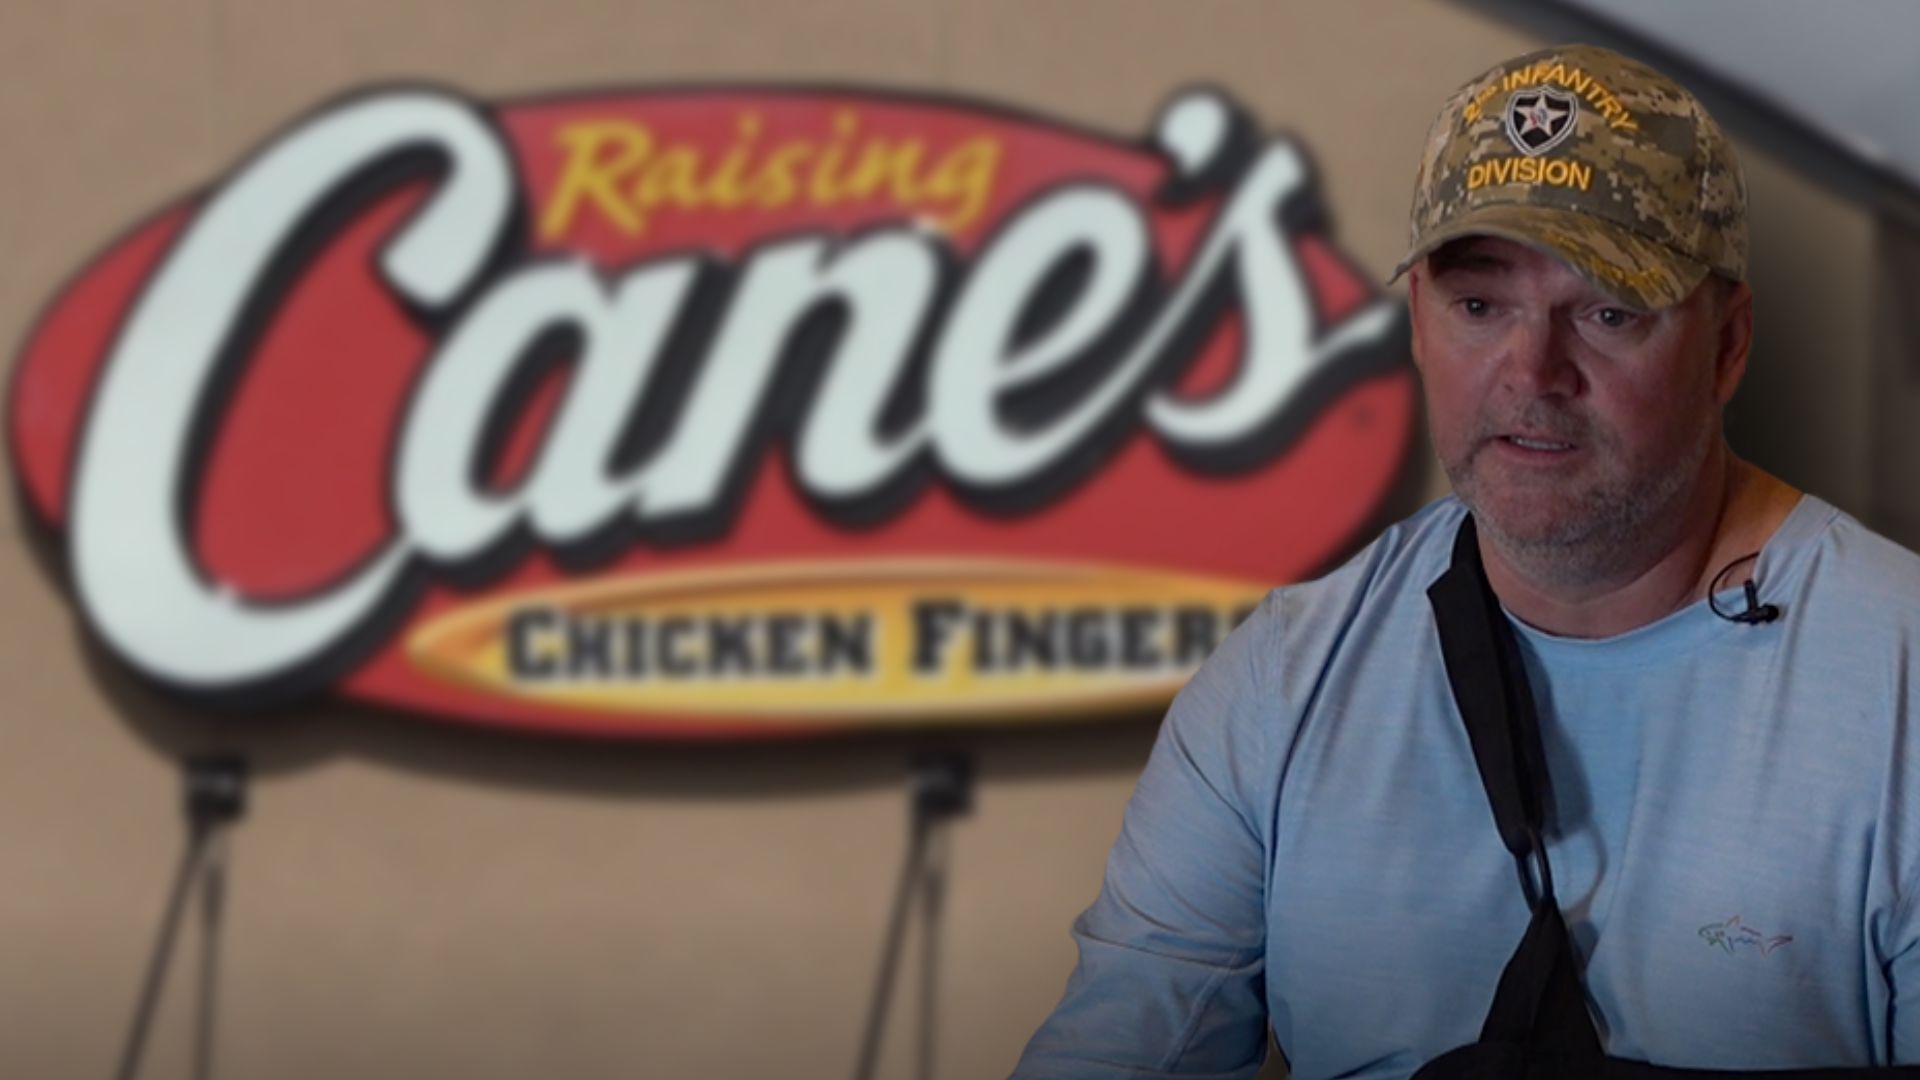 What started as a man asking to borrow a phone at a Raising Cane's escalated to a fight and ended with a man pulling his concealed carry gun until police arrived.